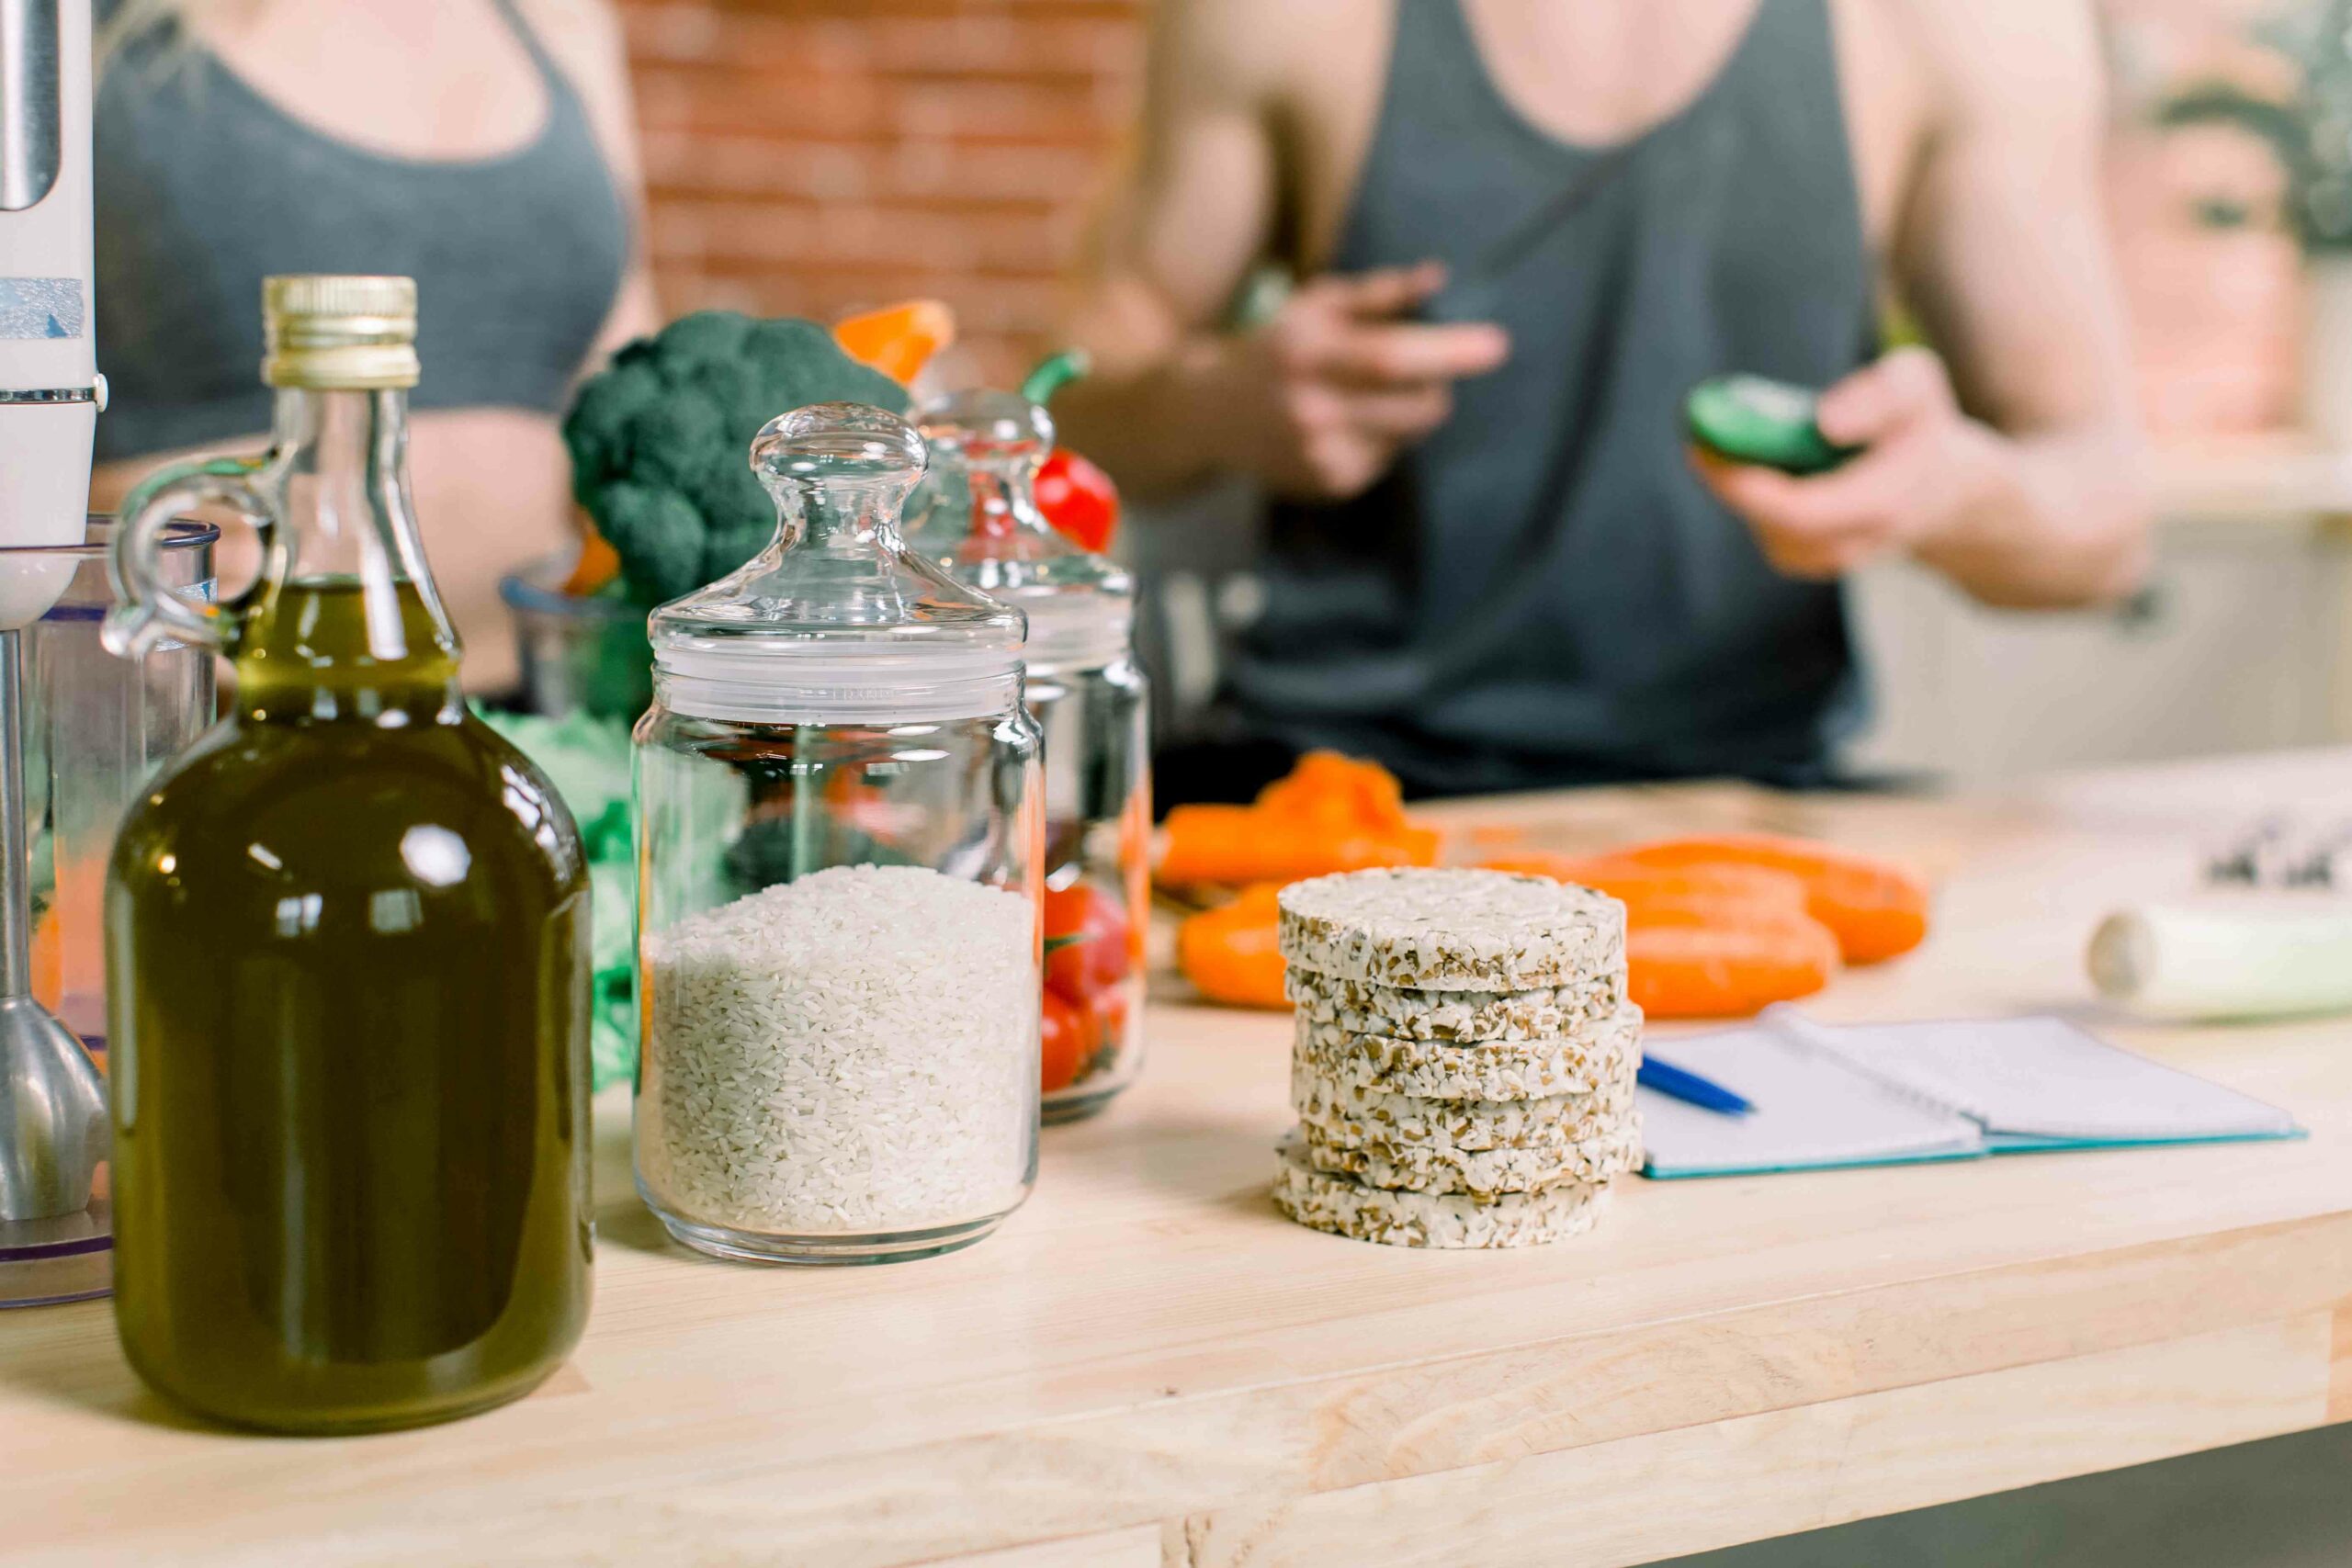 Nutrition mistakes that sabotage your fitness goals